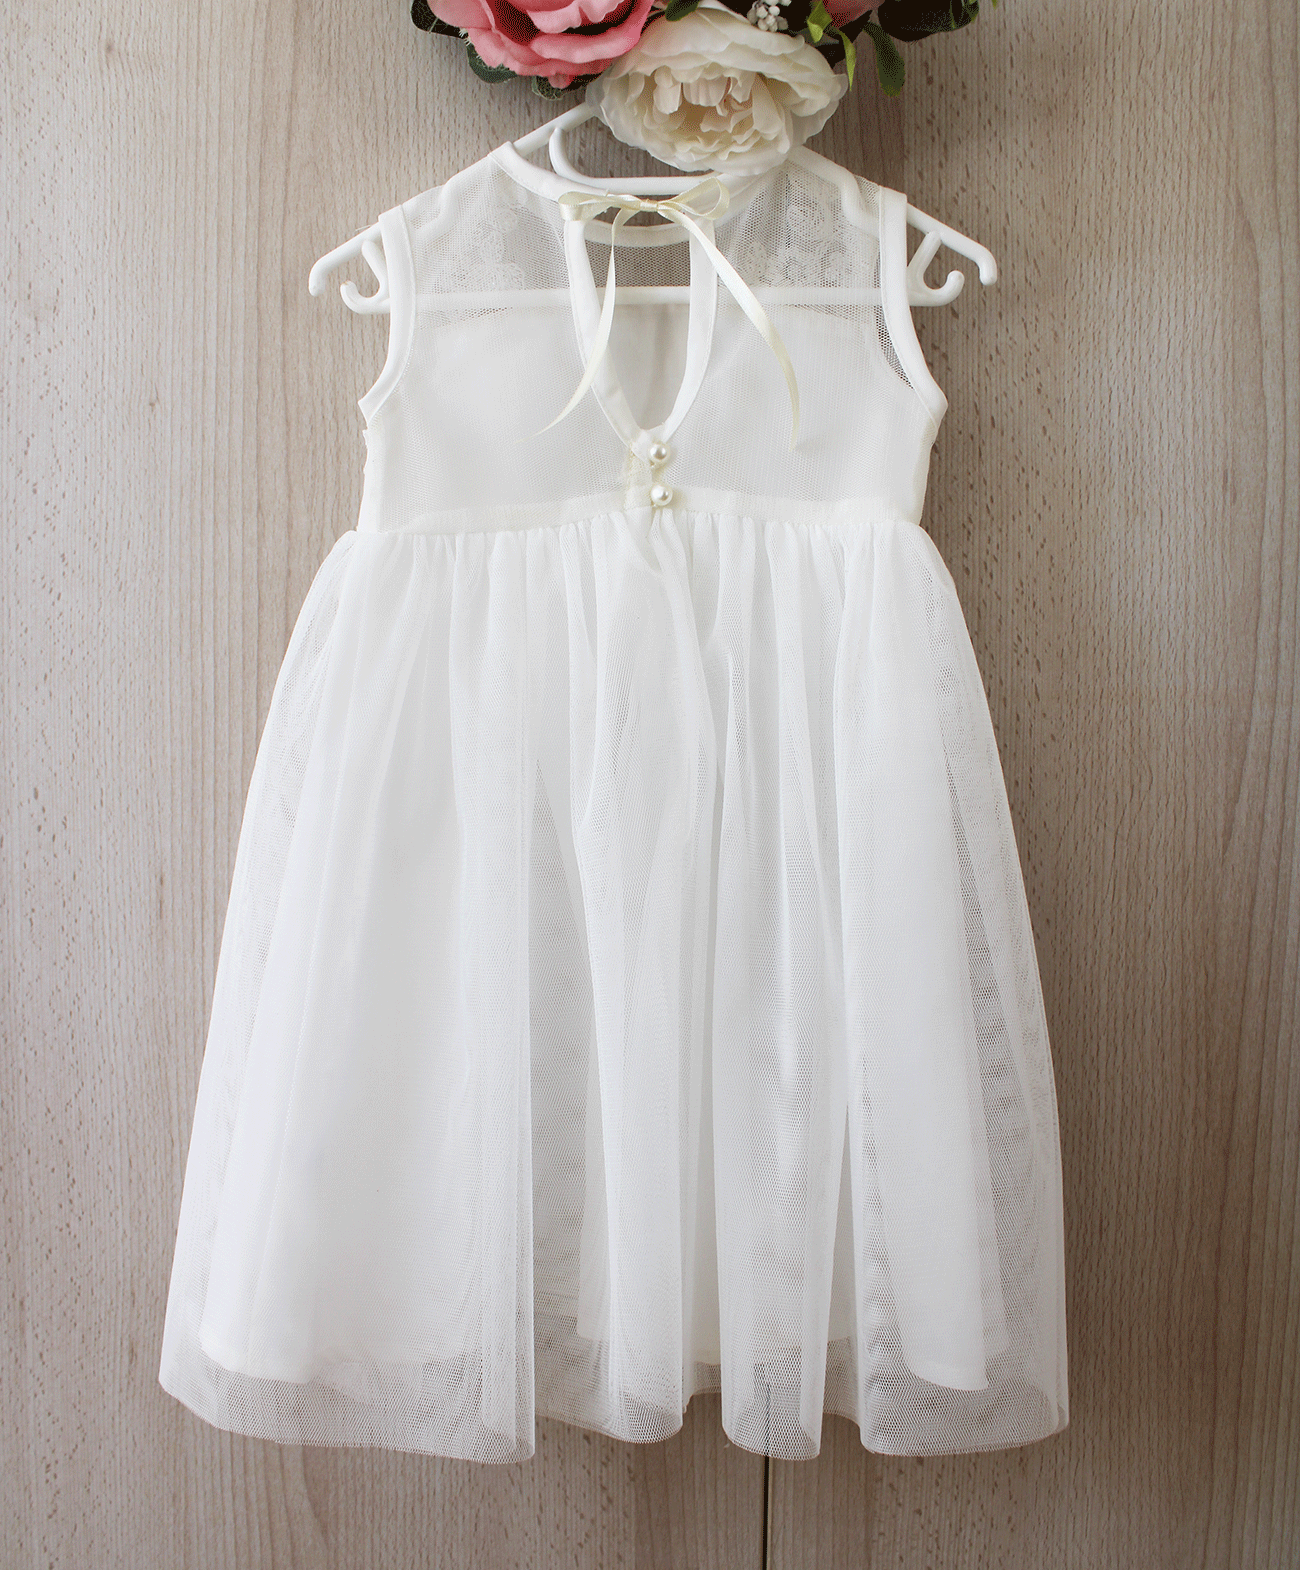 Charlotte Christening Dress - Off white (headband included) 10 working days lead time